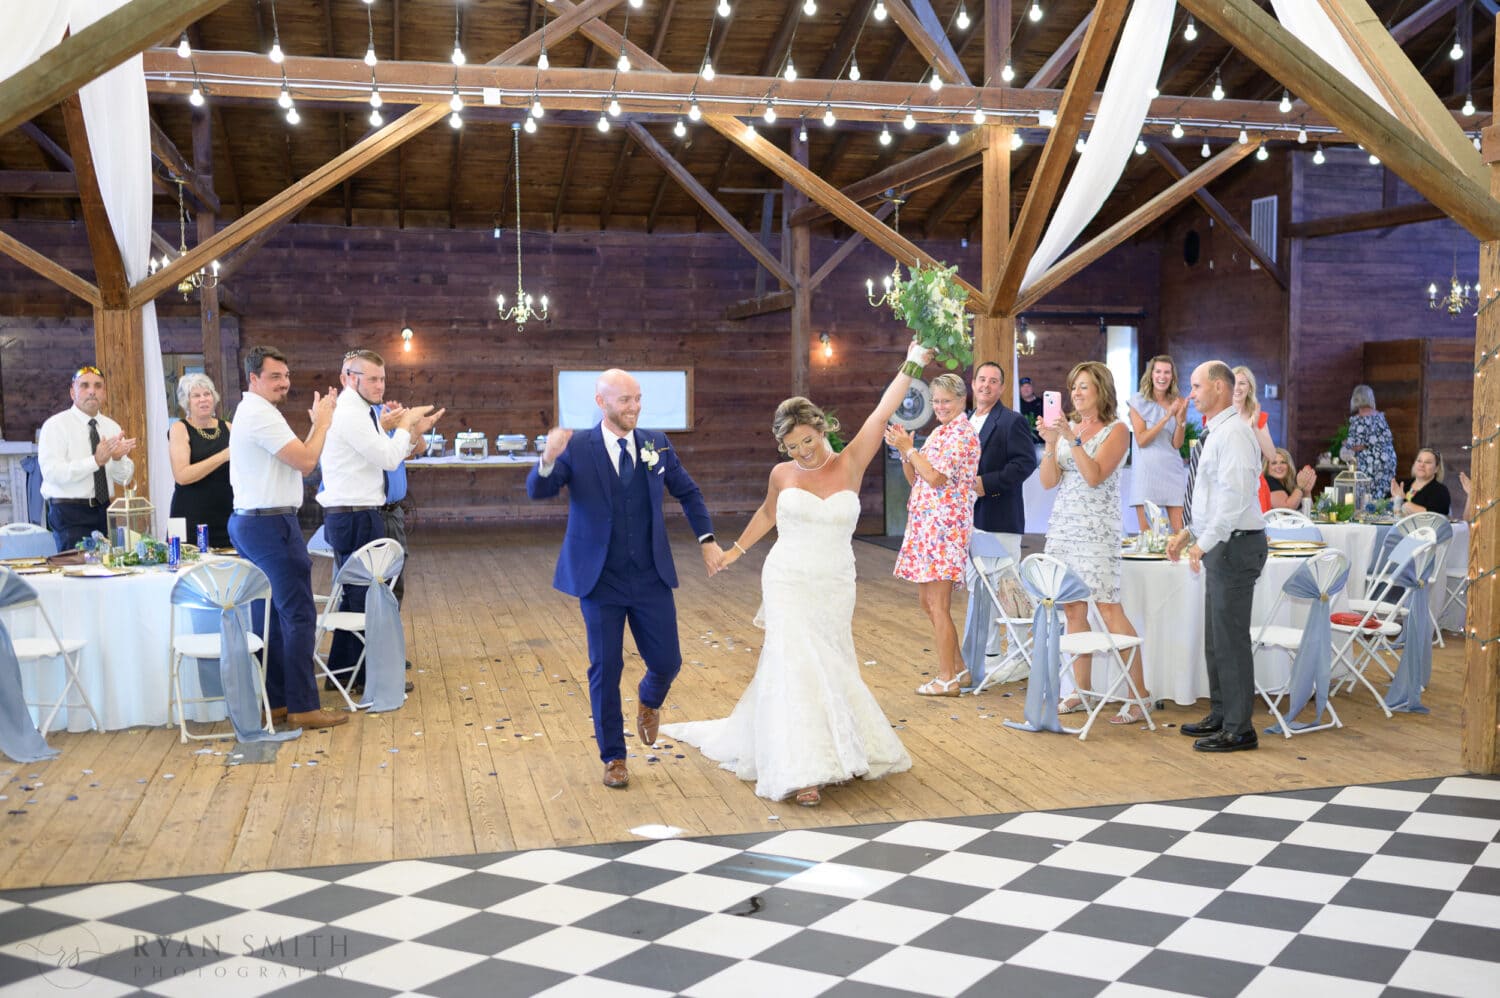 Wild introductions to the wedding reception - The Peanut Warehouse - Conway